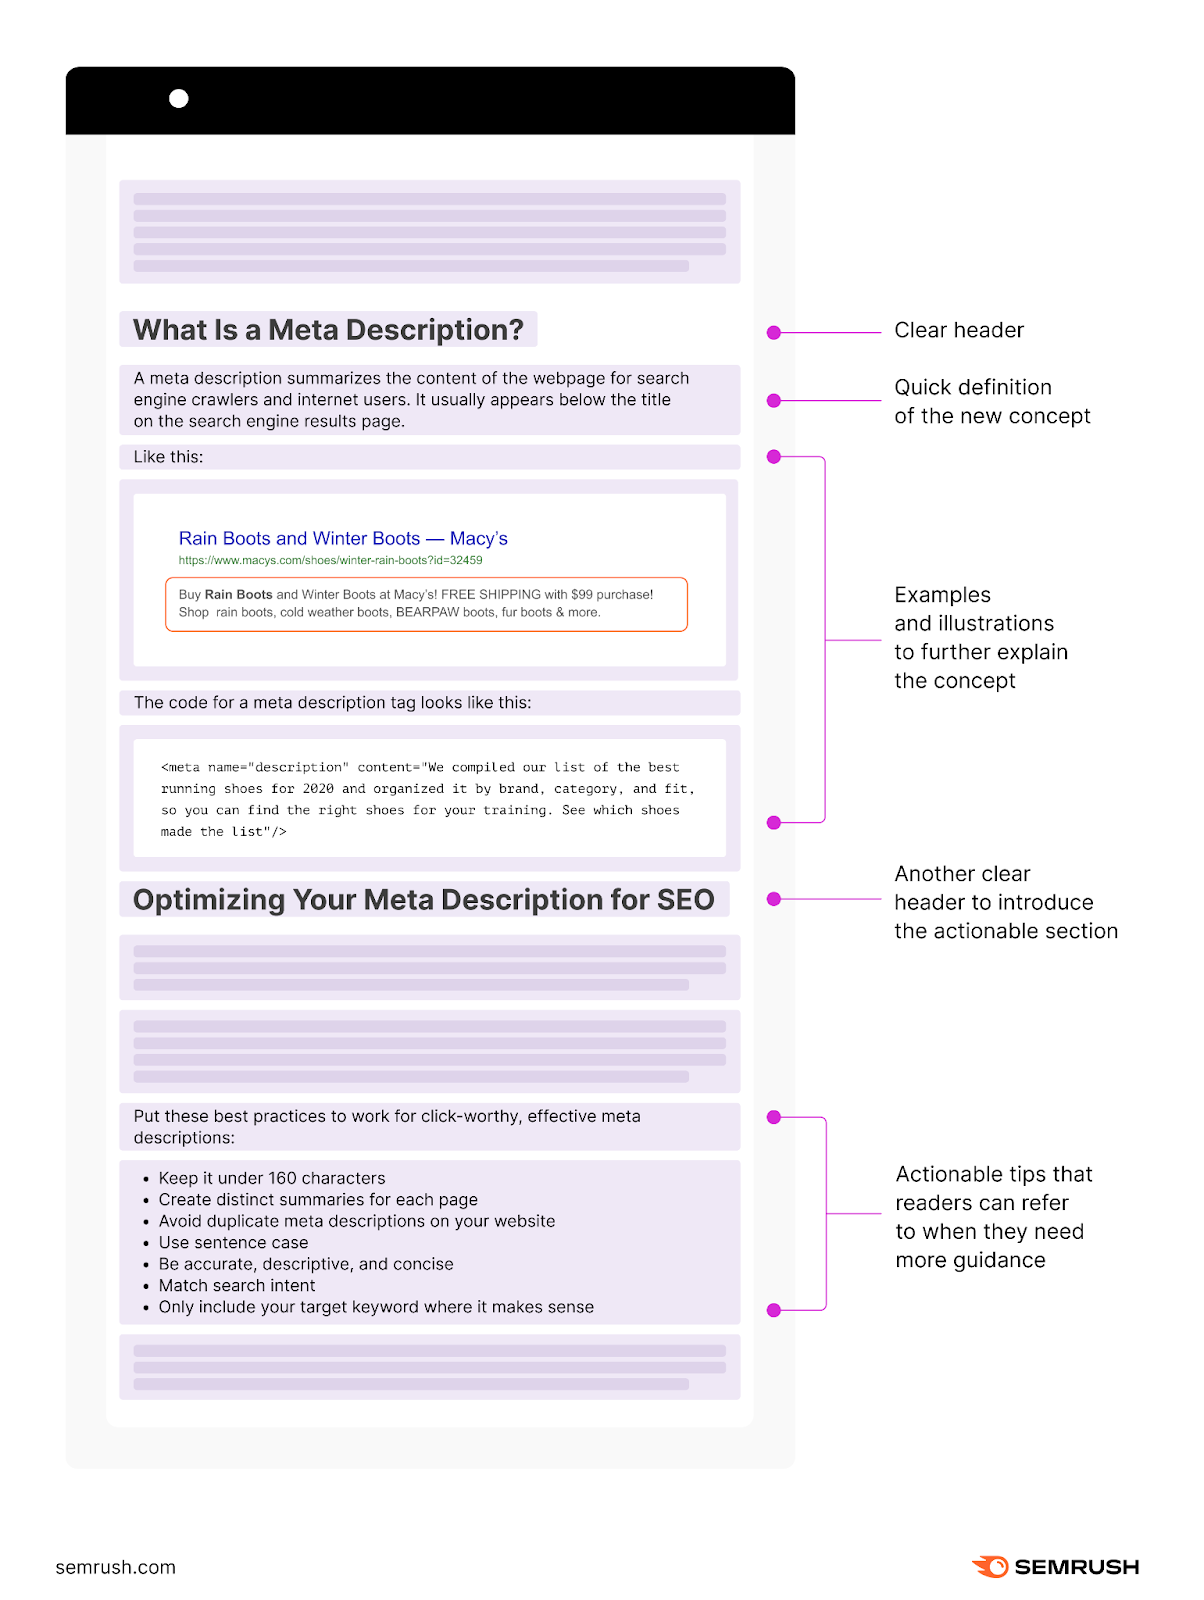 An infographic explaining elements of “What Is a Meta Description” and "Optimizing Your Meta Description for SEO" sections